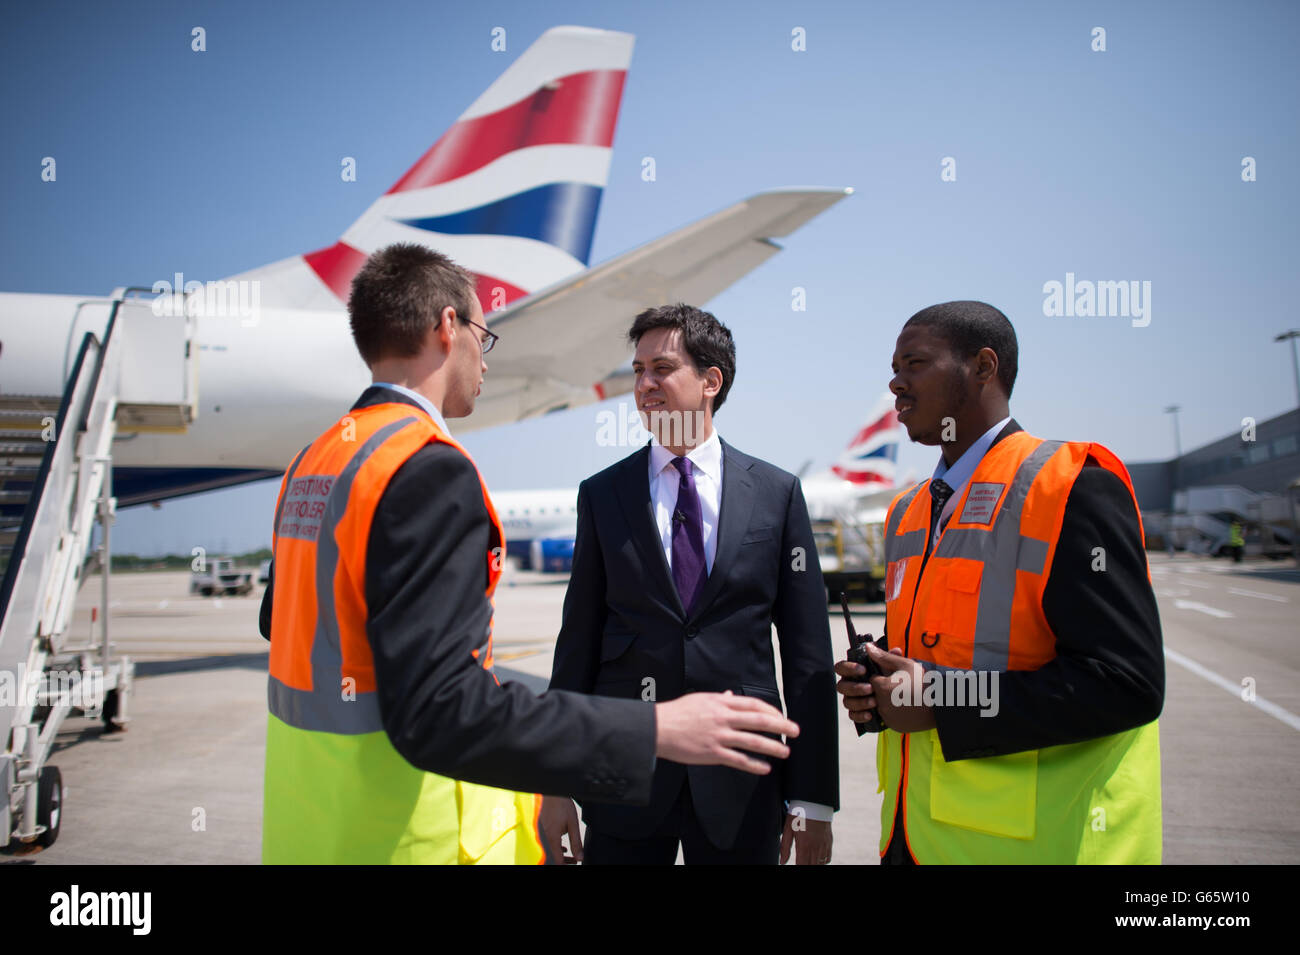 Labour leader Ed Miliband meets airfield operations officers Dean Smith (left) and Dwayne Black during a visit to as he arrives to City Airport in London today after made a speech on welfare reform. Stock Photo